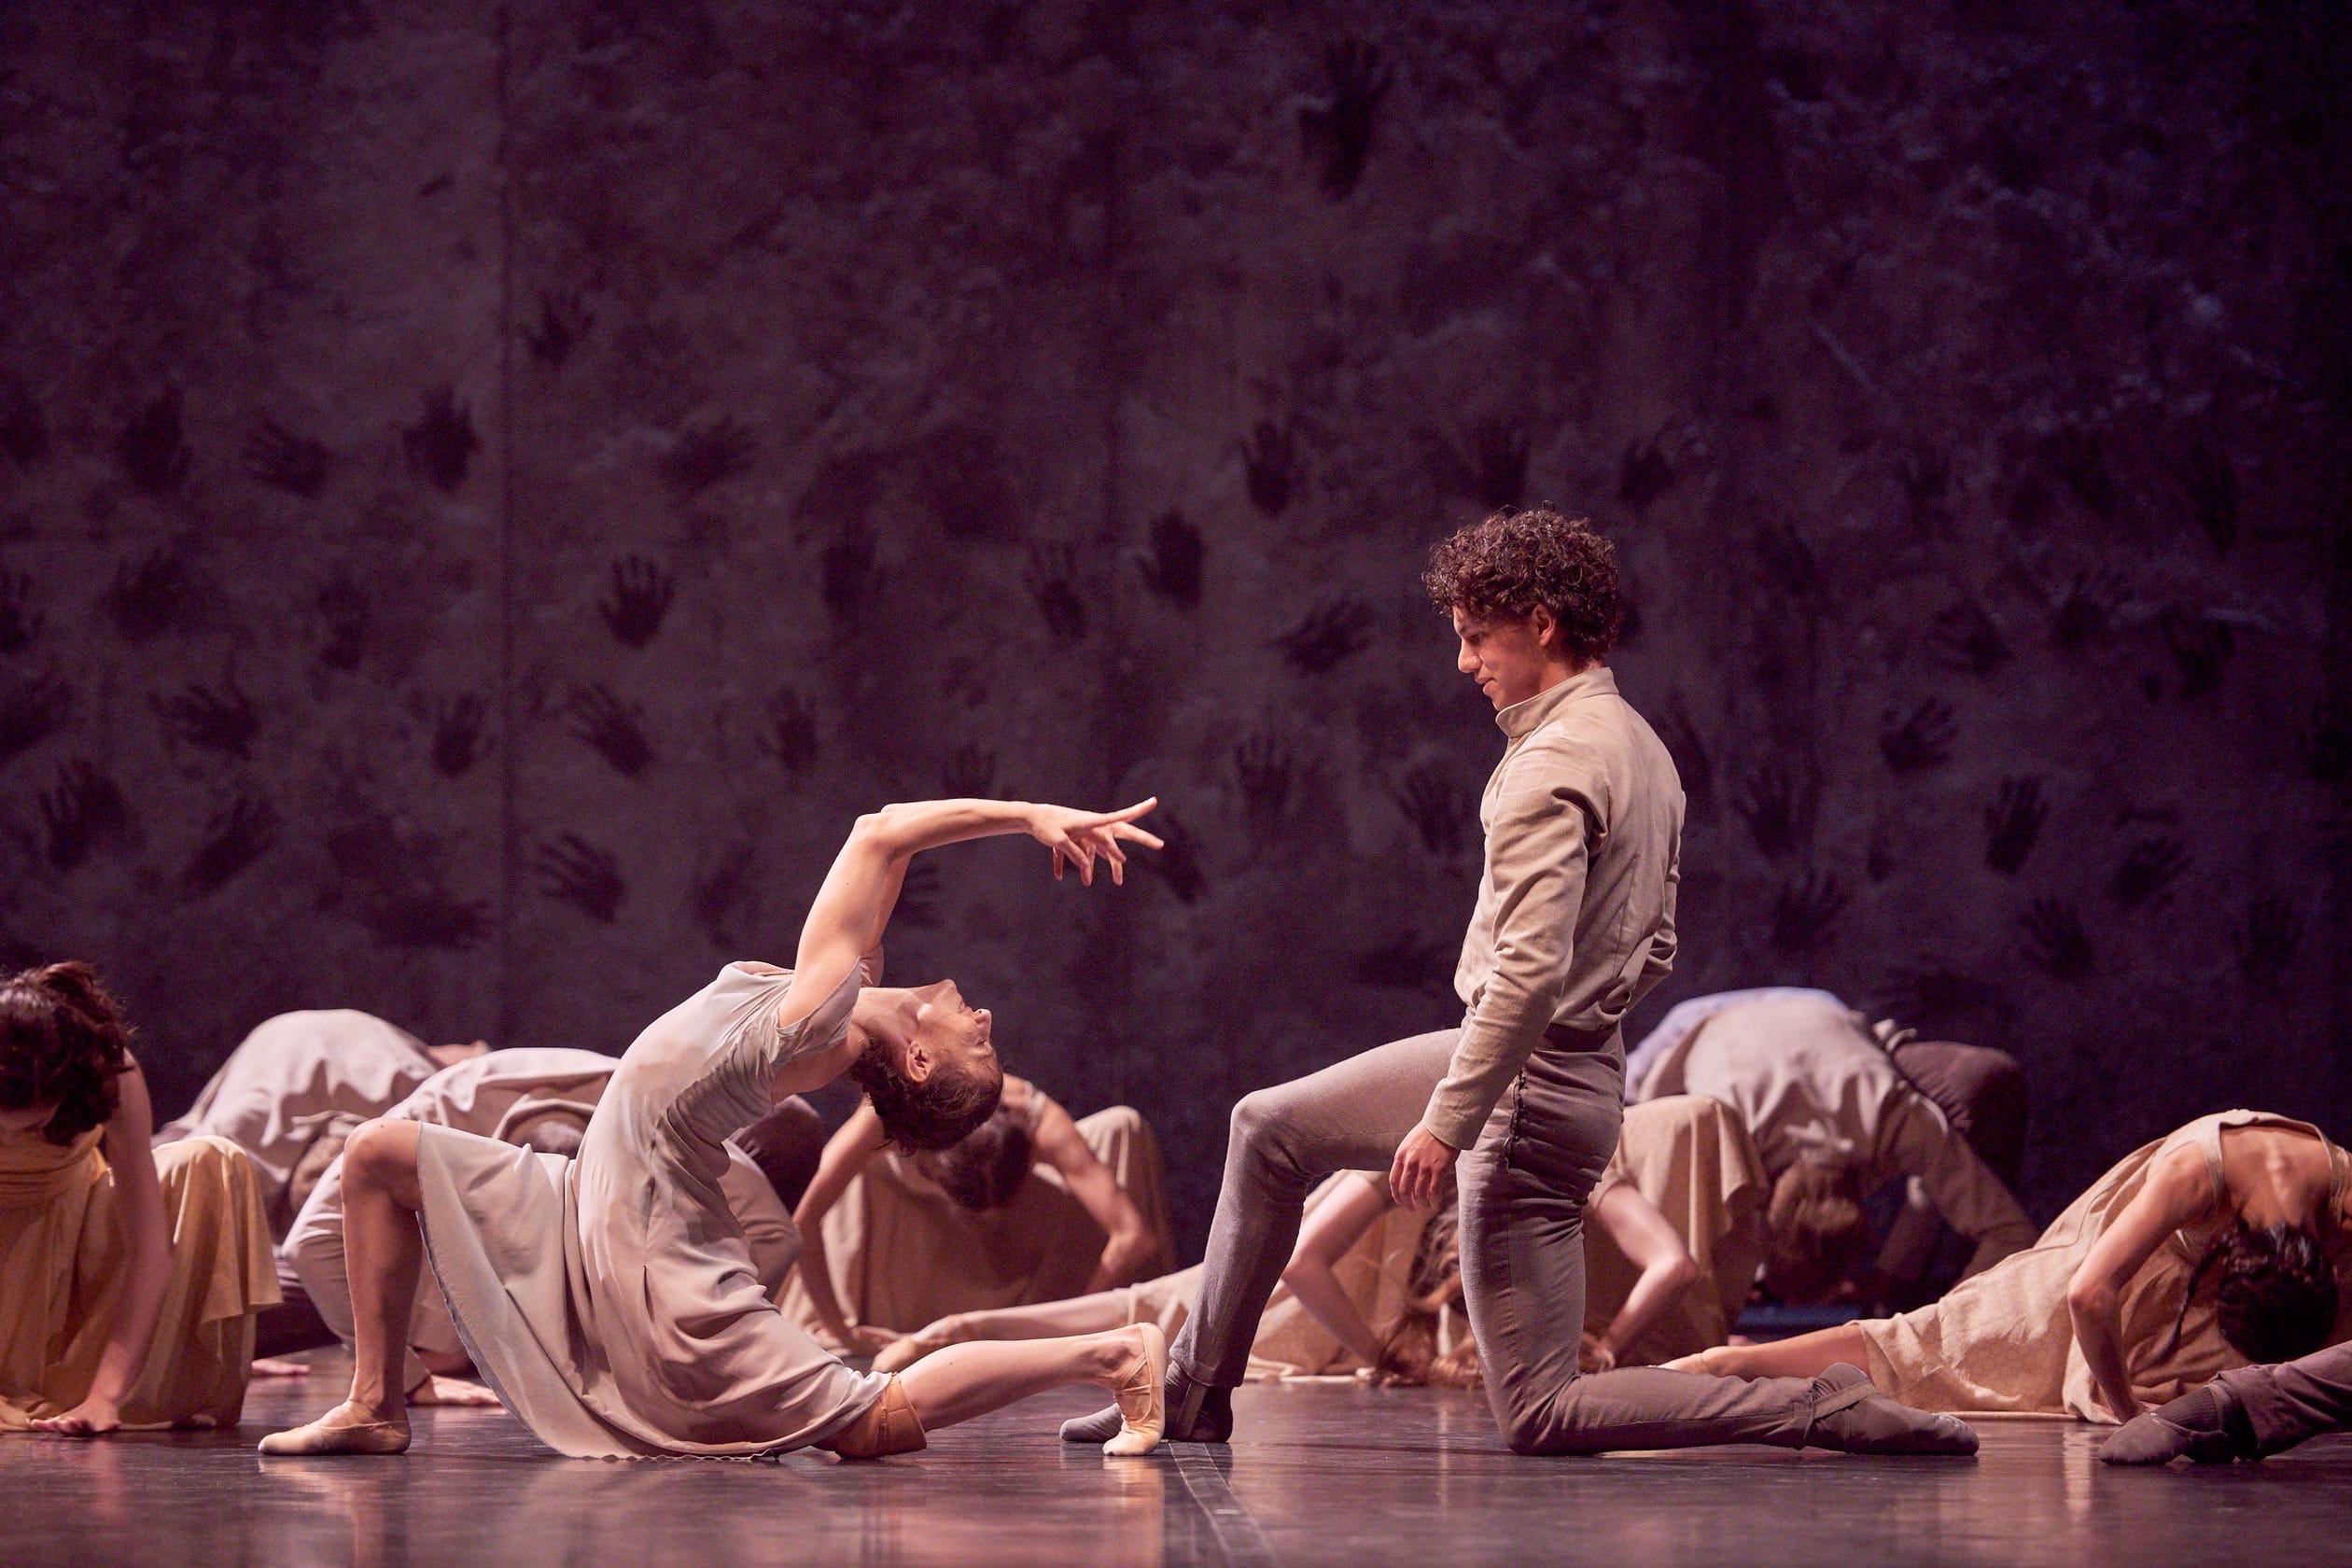 Akram Khan's Giselle: Discover the main characters | English National Ballet